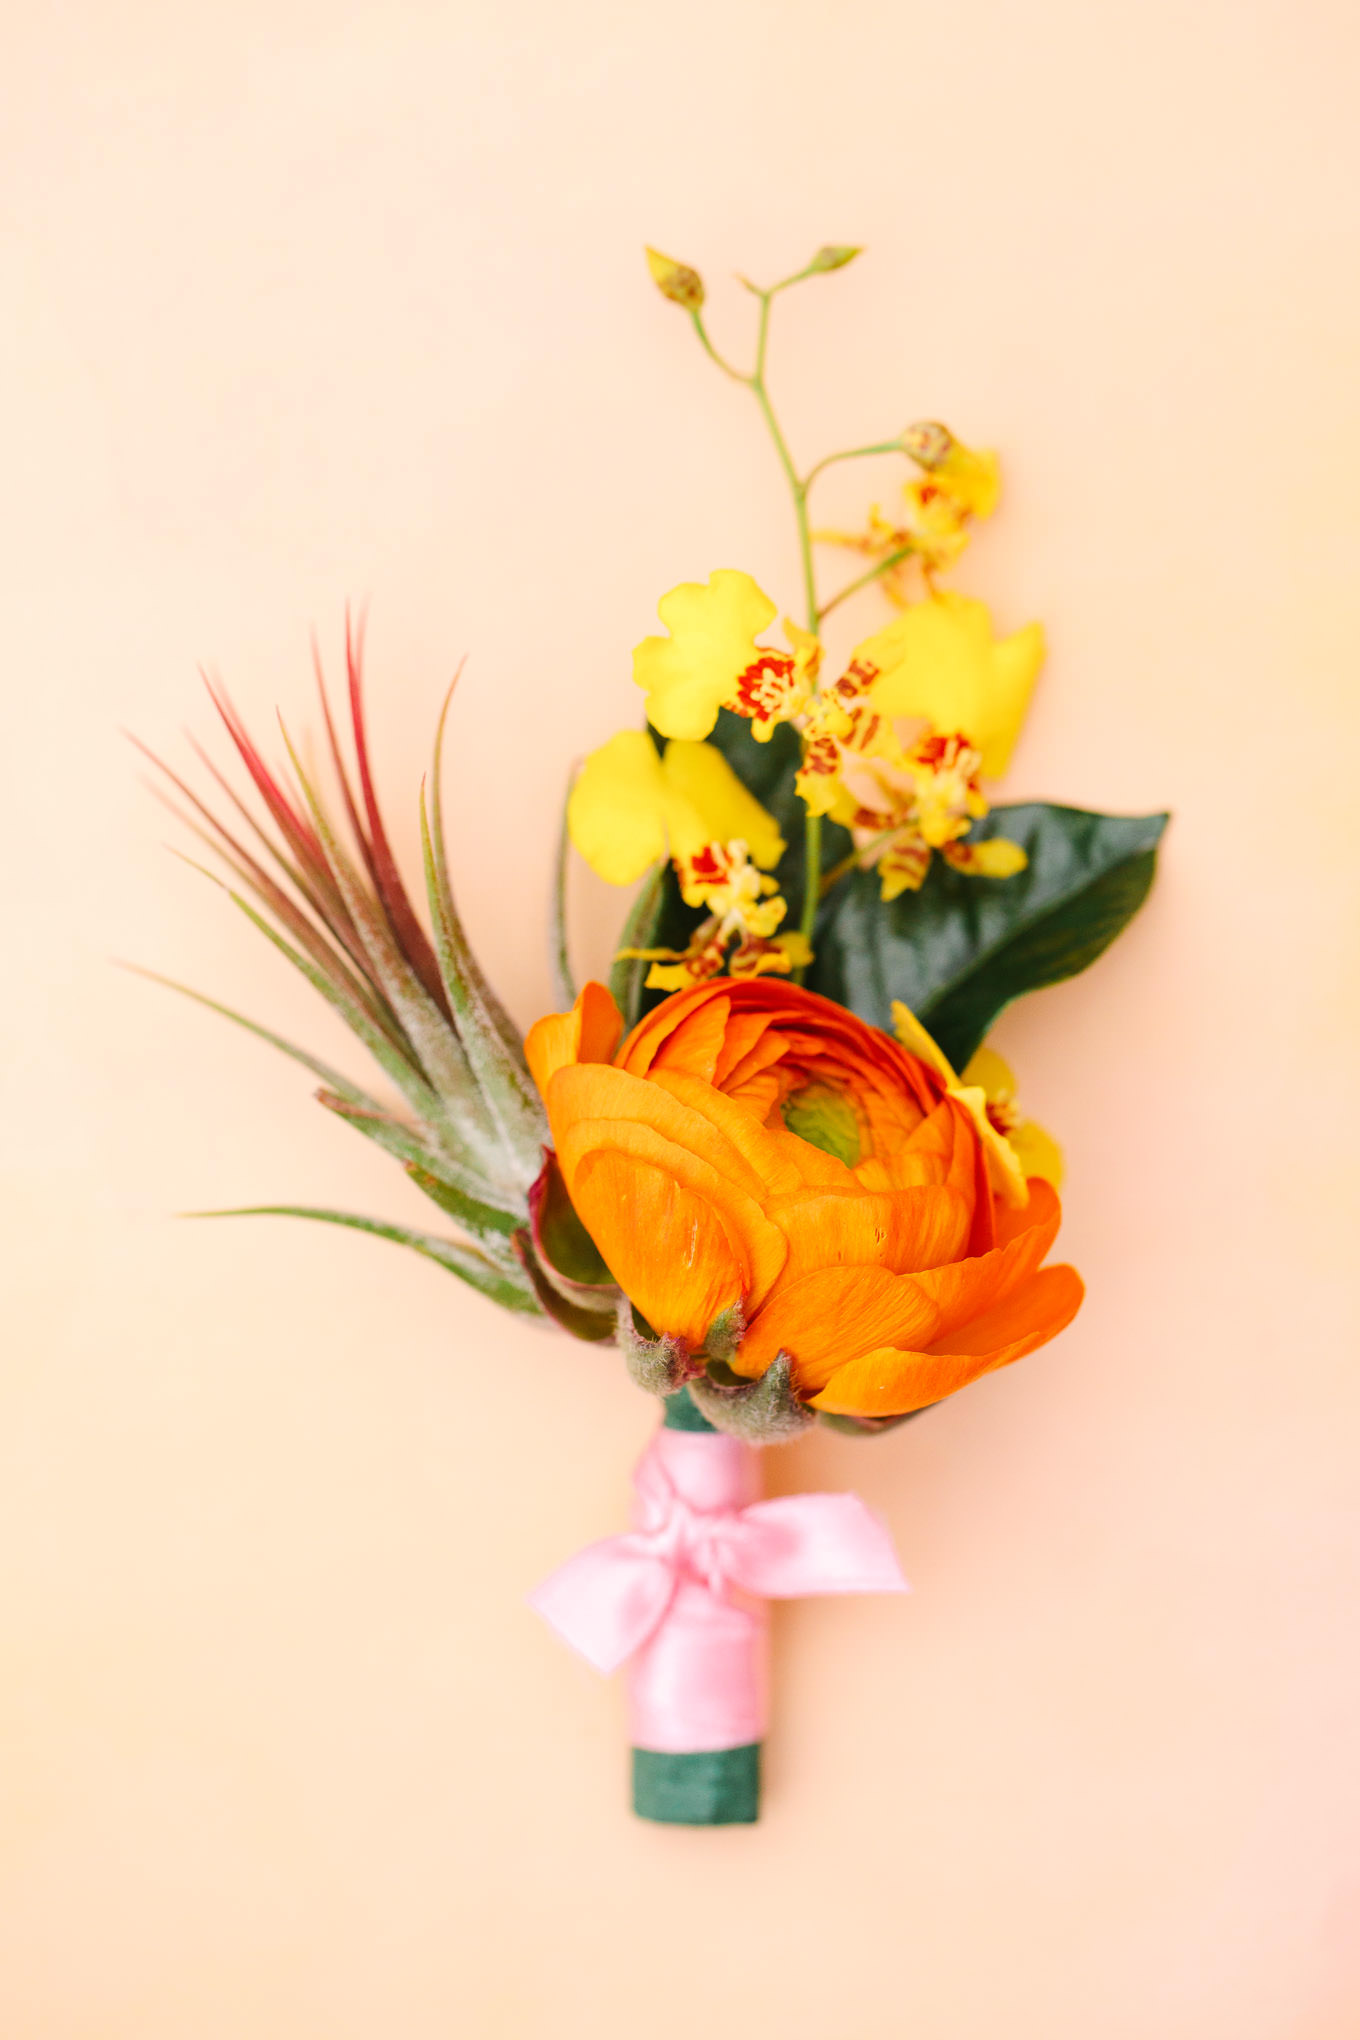 Orange groom's boutonniere | | Colorful Downtown Los Angeles Valentine Wedding | Los Angeles wedding photographer | #losangeleswedding #colorfulwedding #DTLA #valentinedtla   Source: Mary Costa Photography | Los Angeles